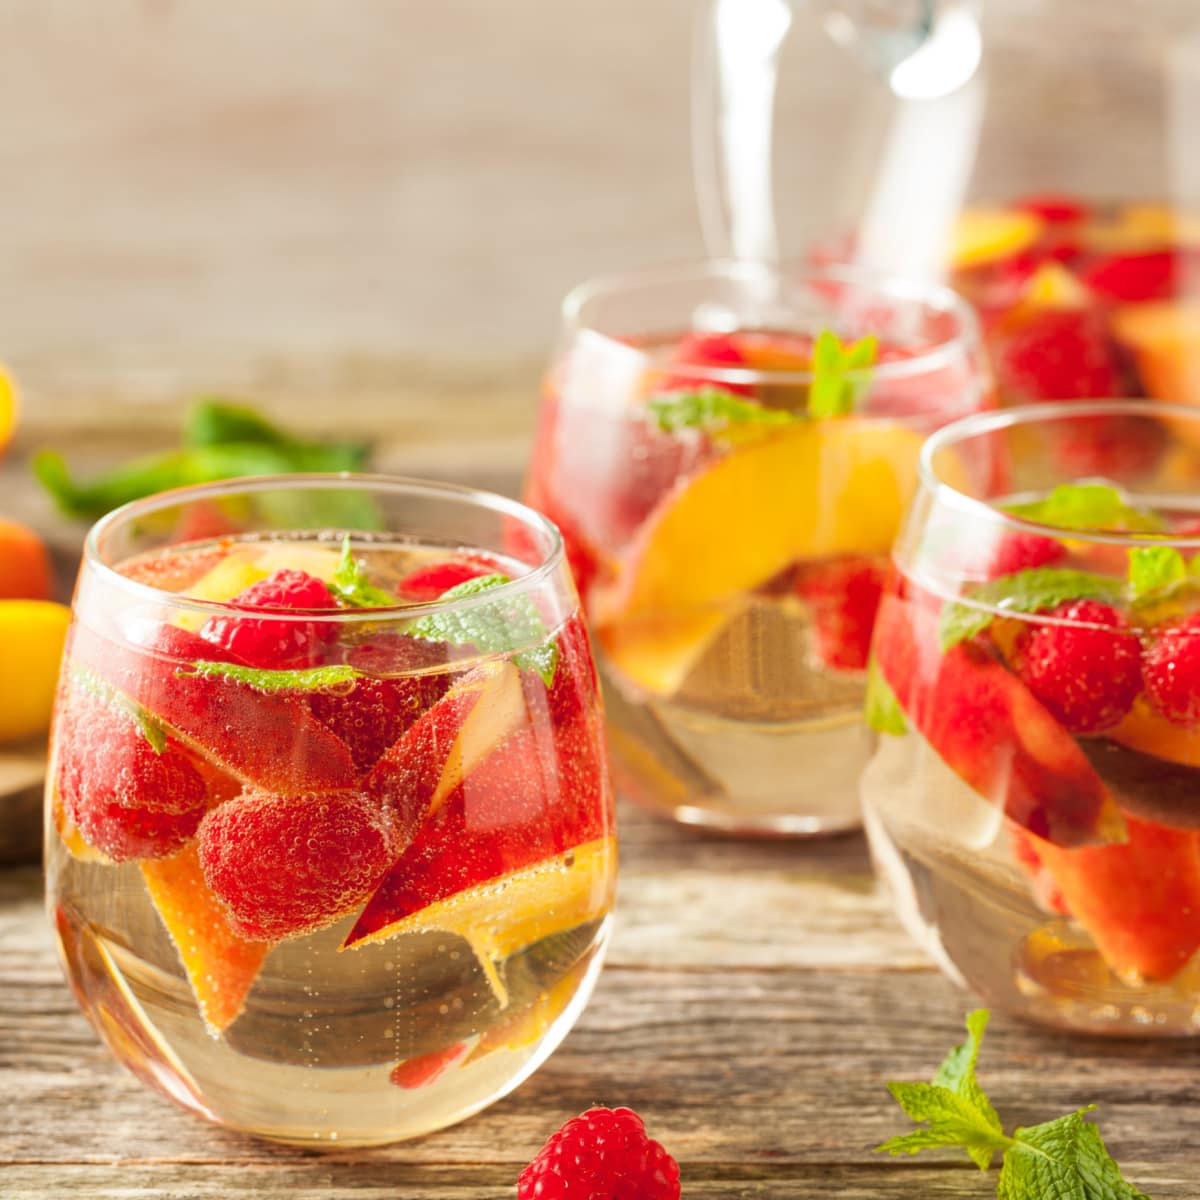 A pitcher and three glasses of white sangria on a wooden table with fresh raspberries and peaches